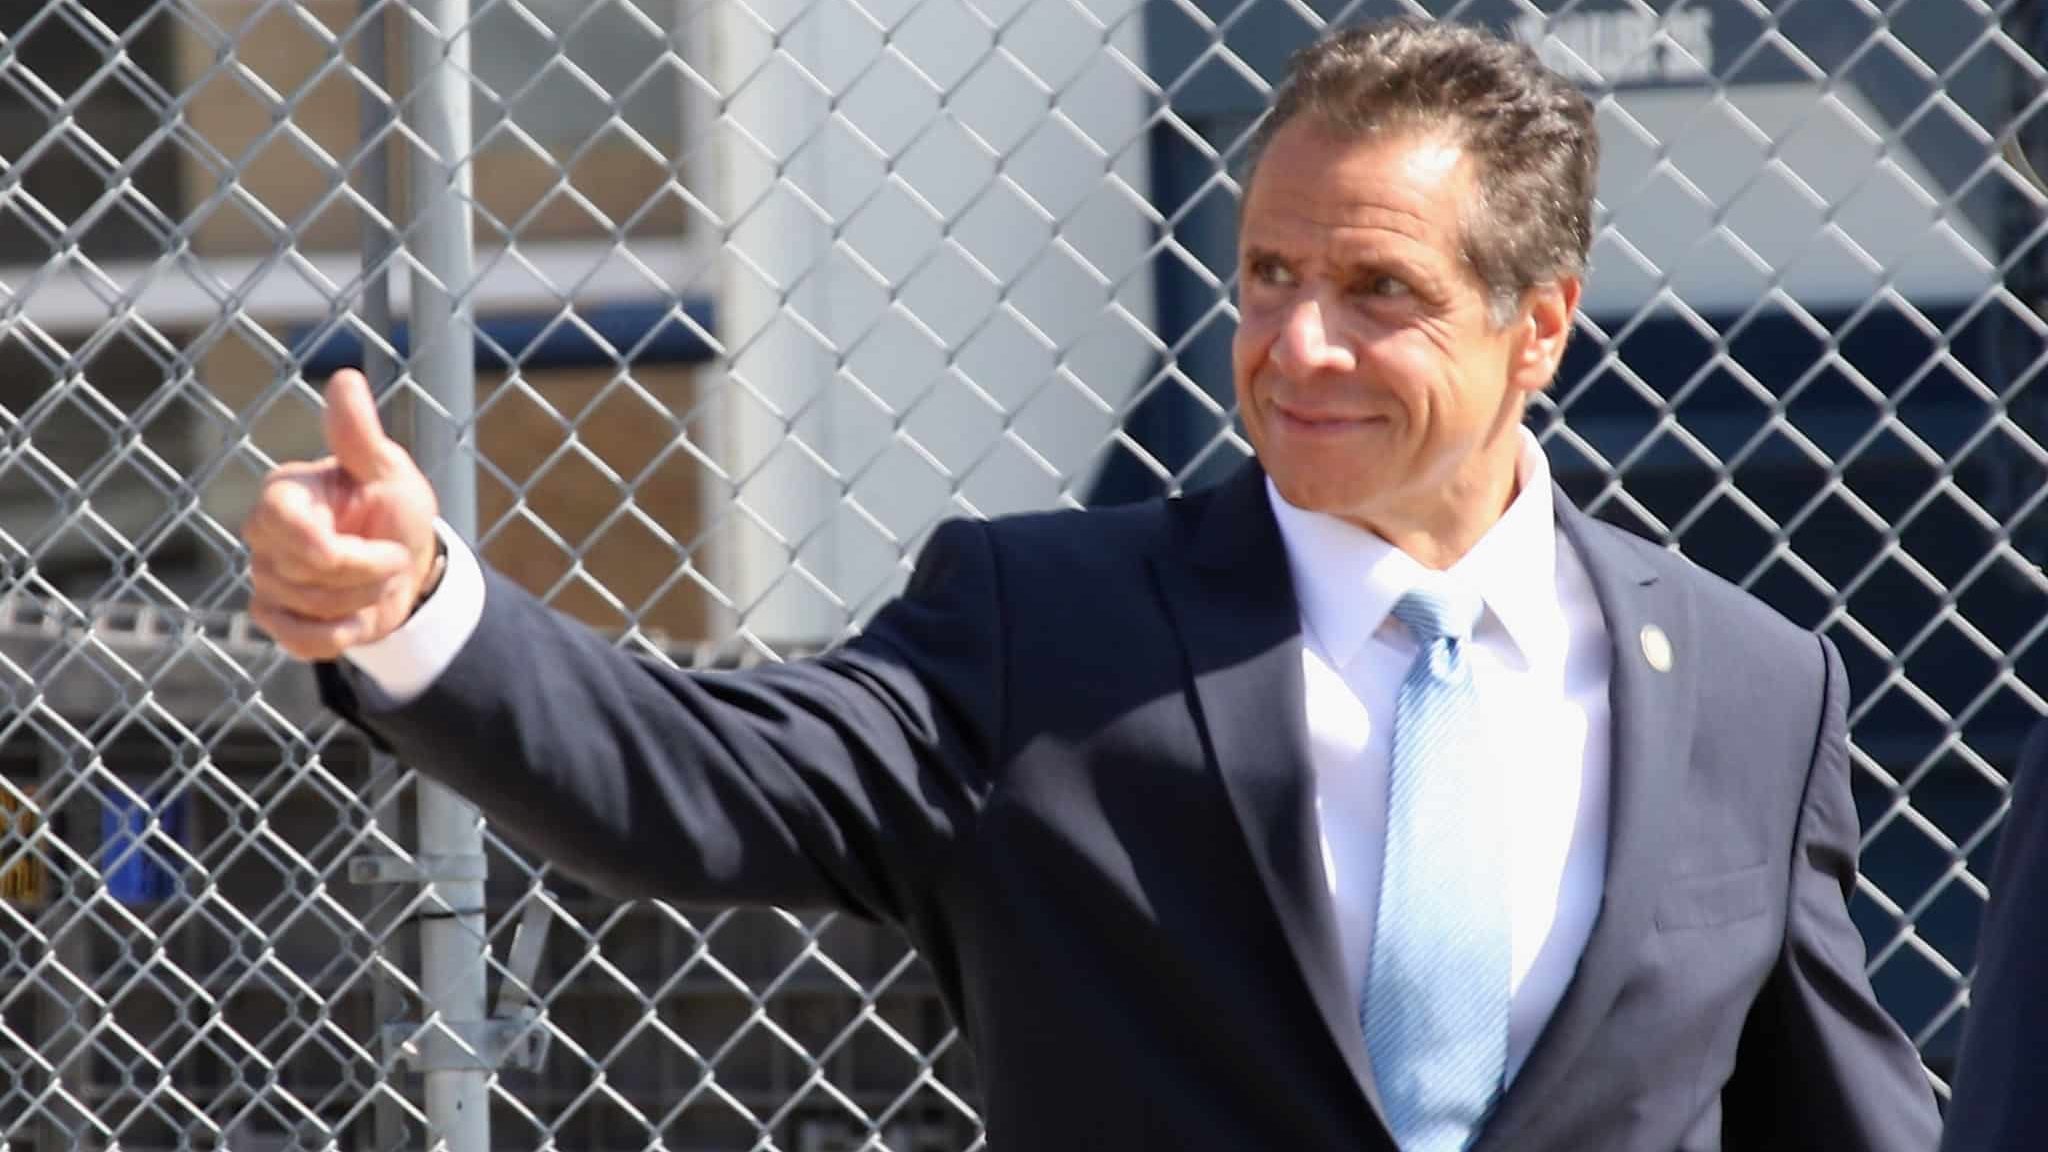 ELMONT, NEW YORK - SEPTEMBER 23: New York Gov. Andrew Cuomo arrives for the groundbreaking ceremony for the New York Islanders hockey arena at Belmont Park on September 23, 2019 in Elmont, New York. The $1.3 billion facility, which will seat 19,000 and include shops, restaurants and a hotel, is expected to be completed in time for the 2021-2022 hockey season.